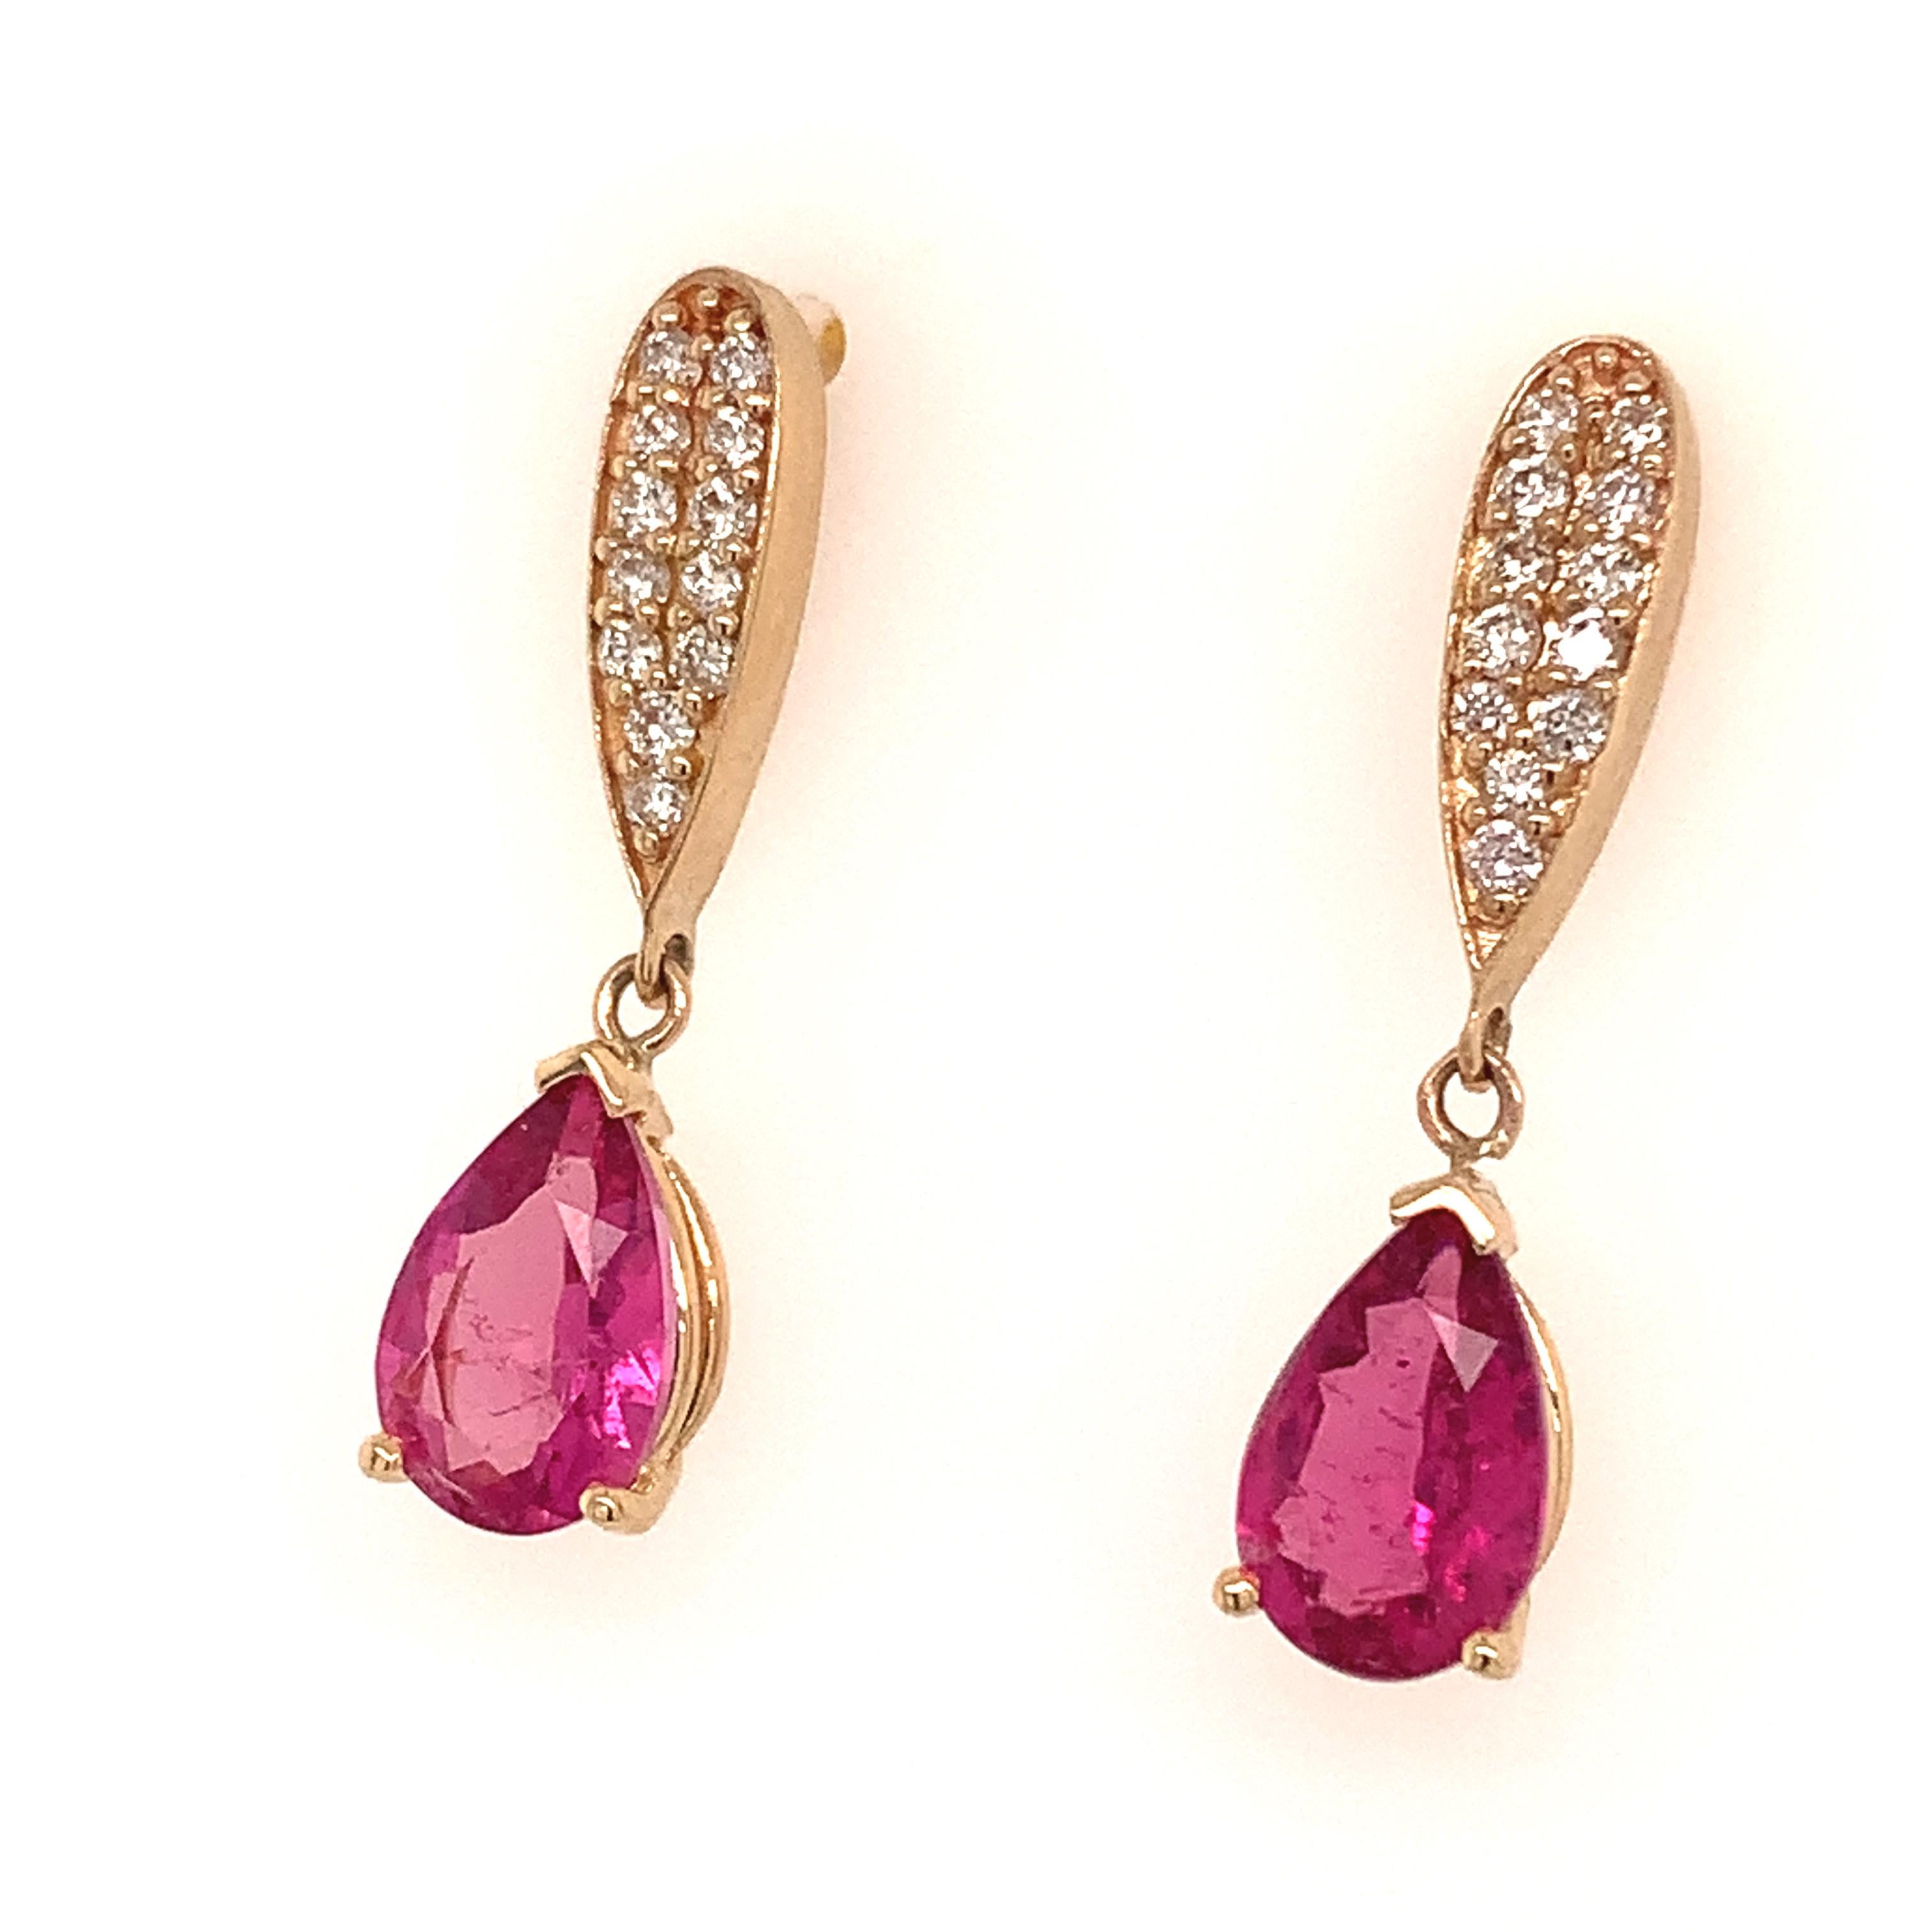 Natural Tourmaline Rubellite Diamond Earrings 14k Gold 1.60 TCW Certified For Sale 2